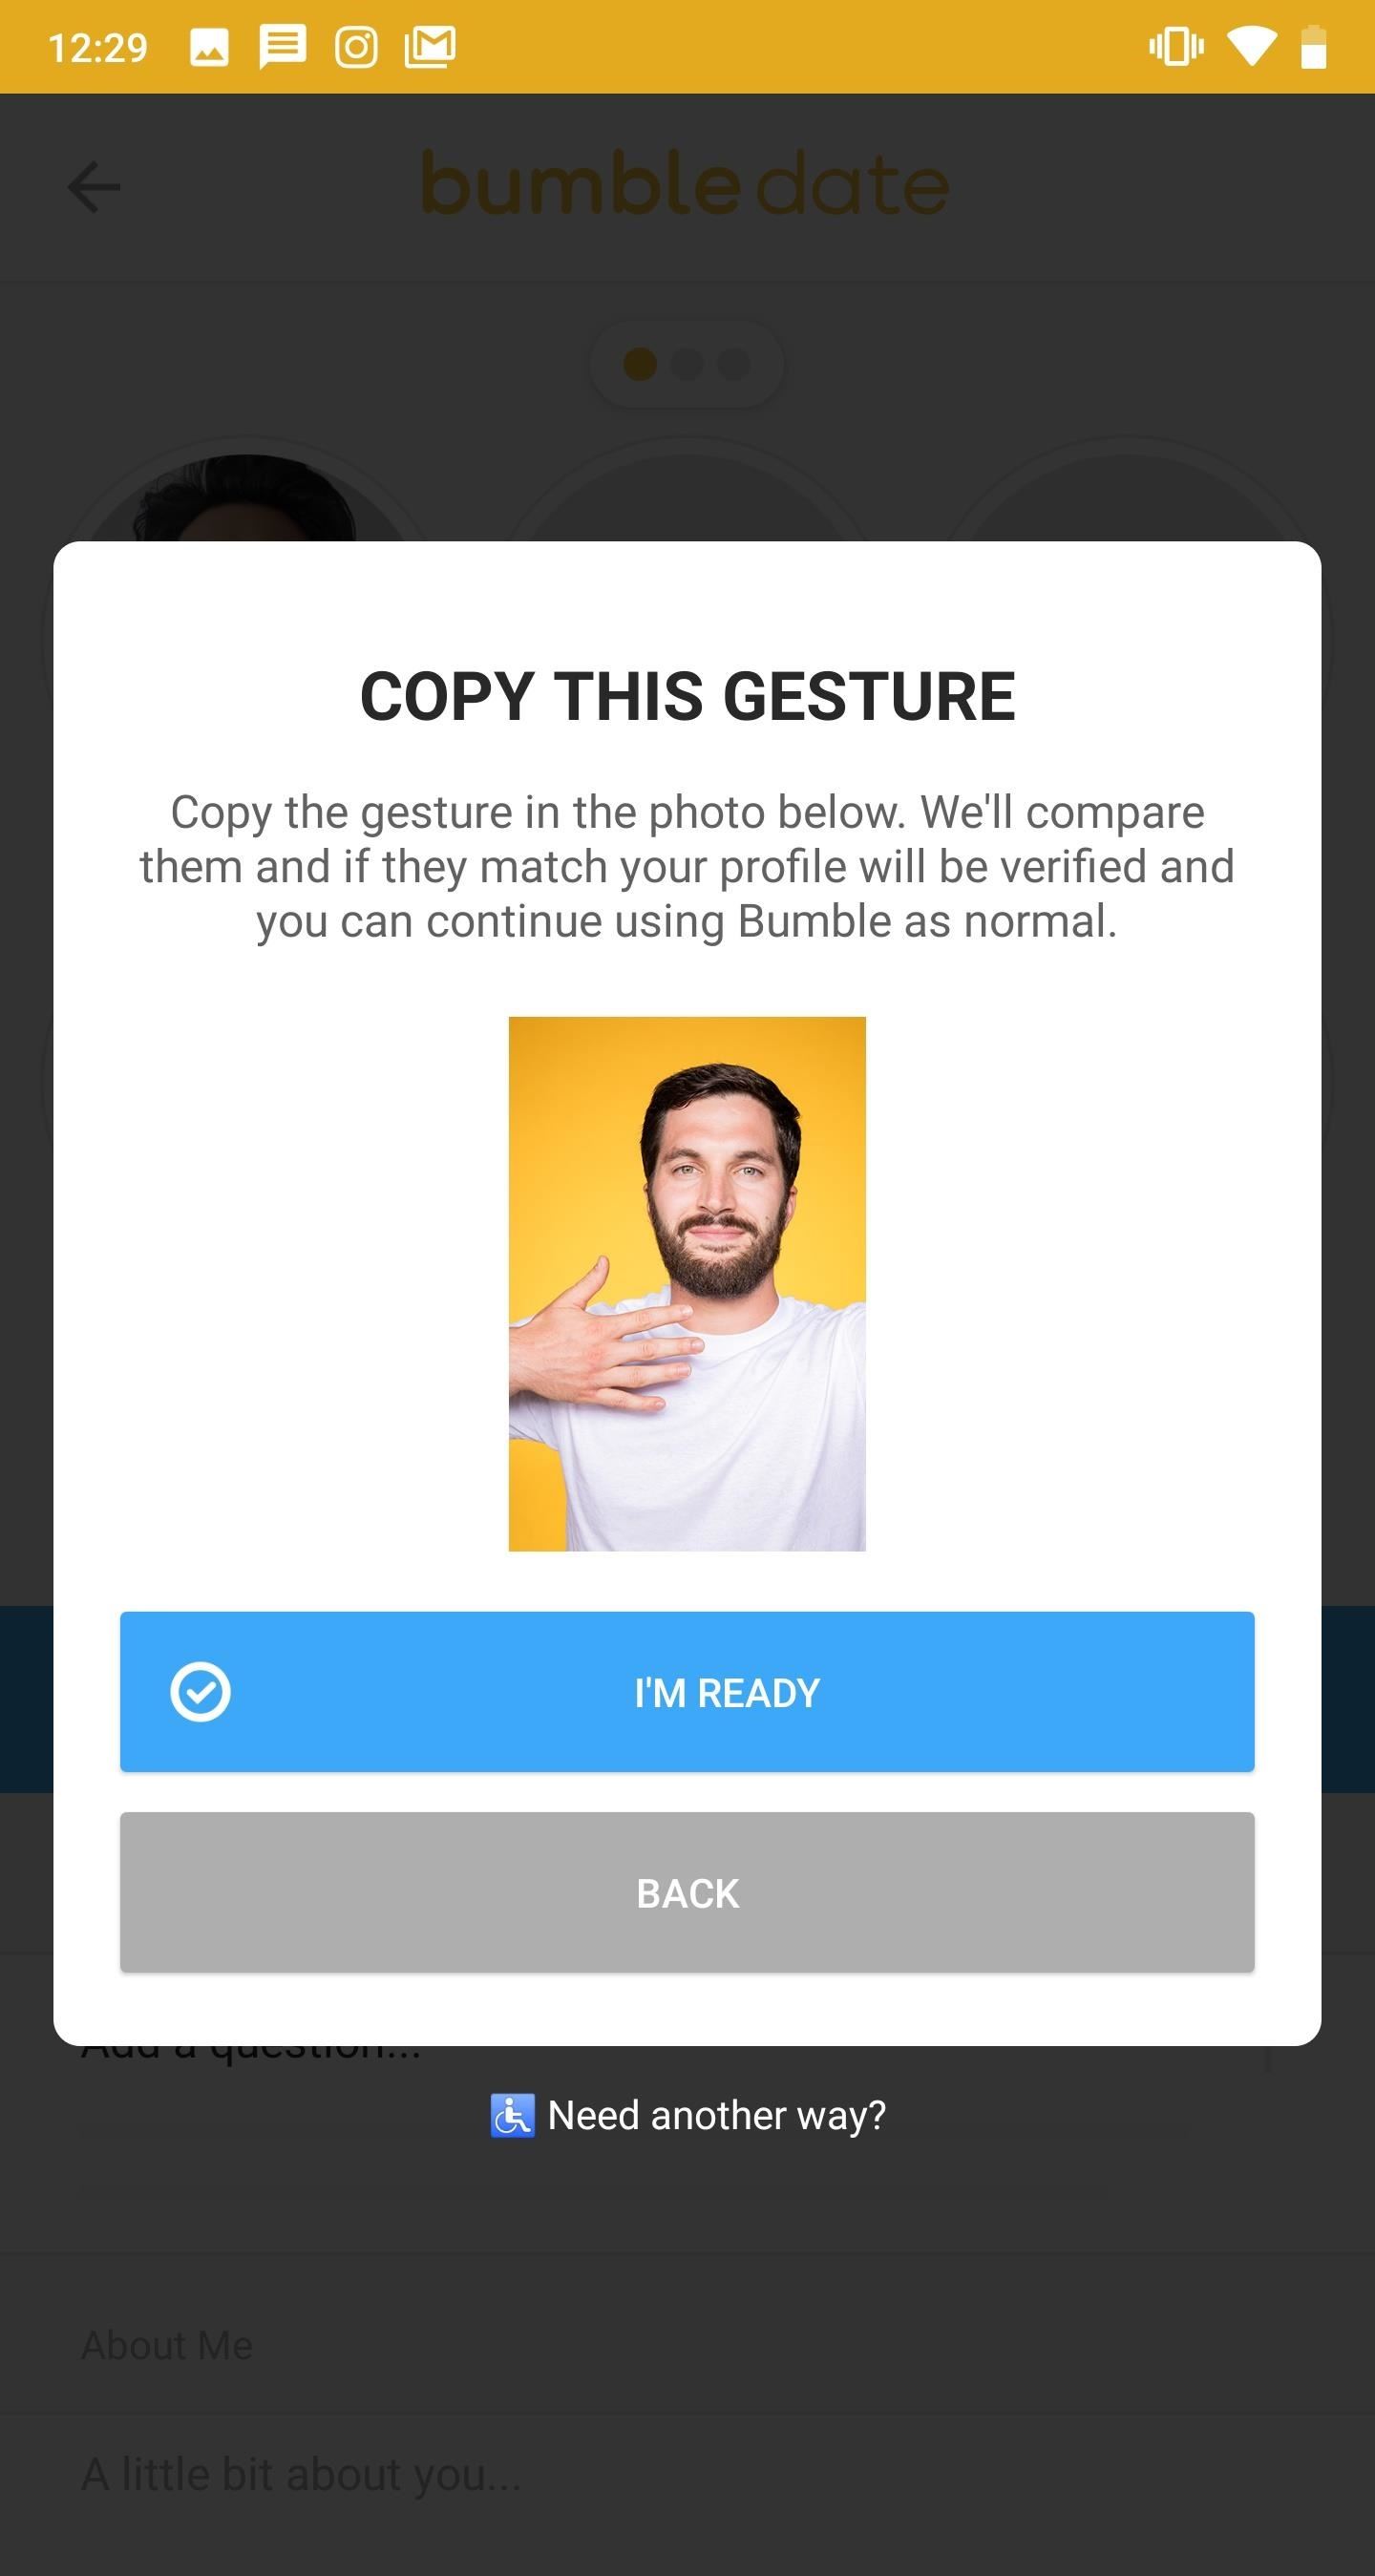 Verification hack picture badoo Learn how